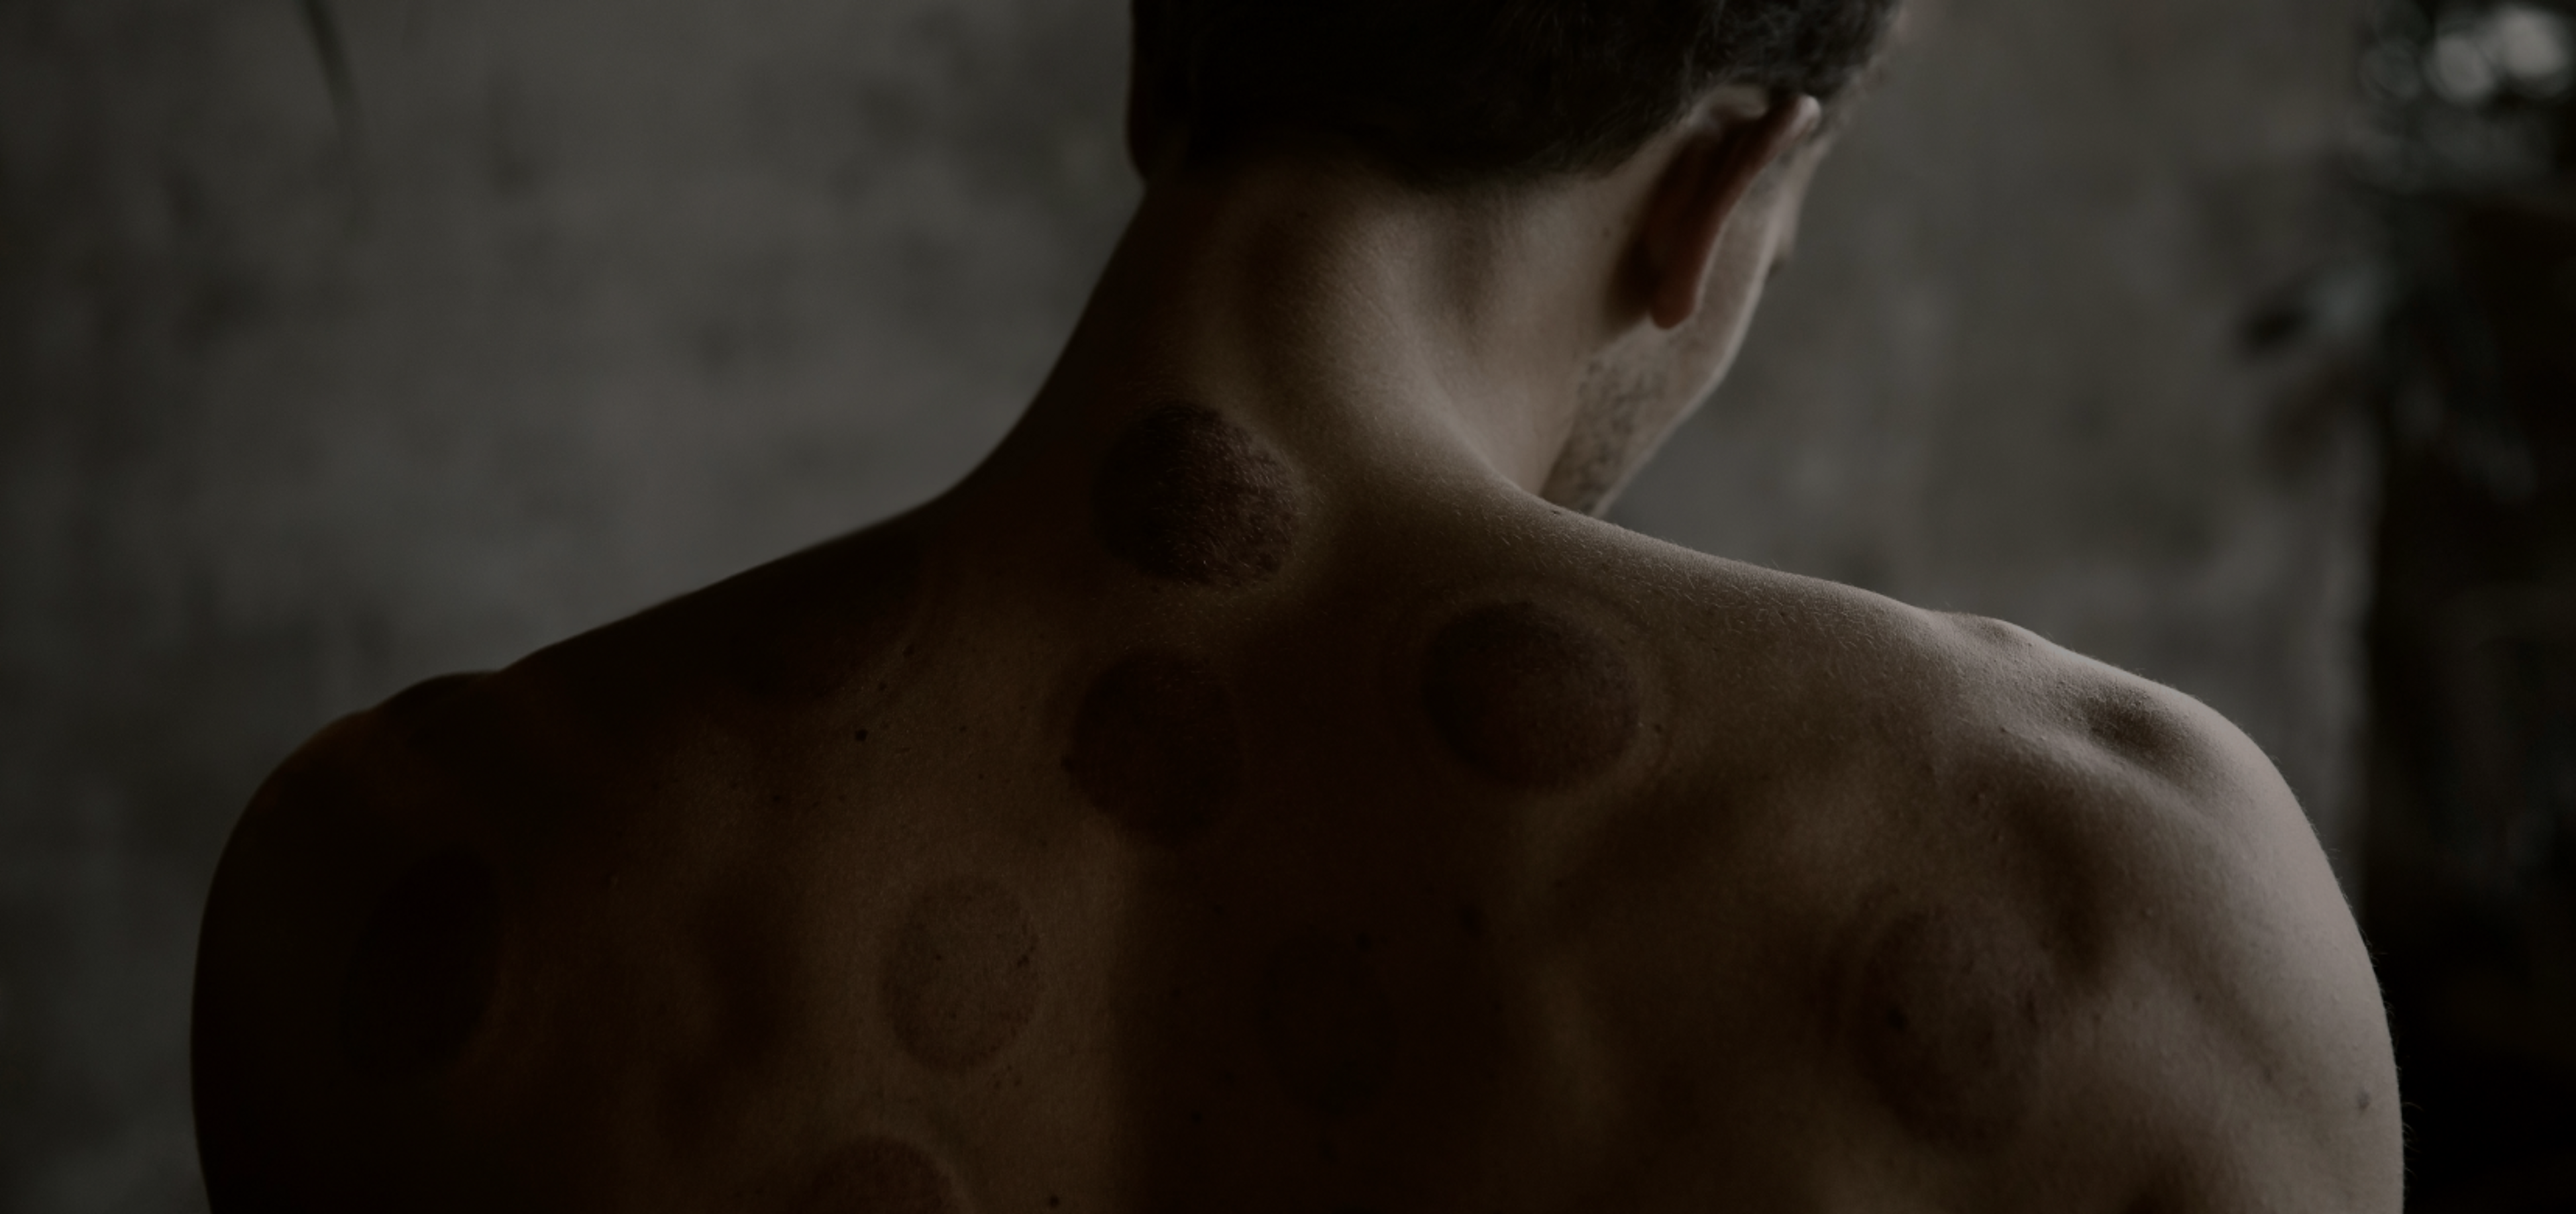 A man's back shows remnants of cupping remedy